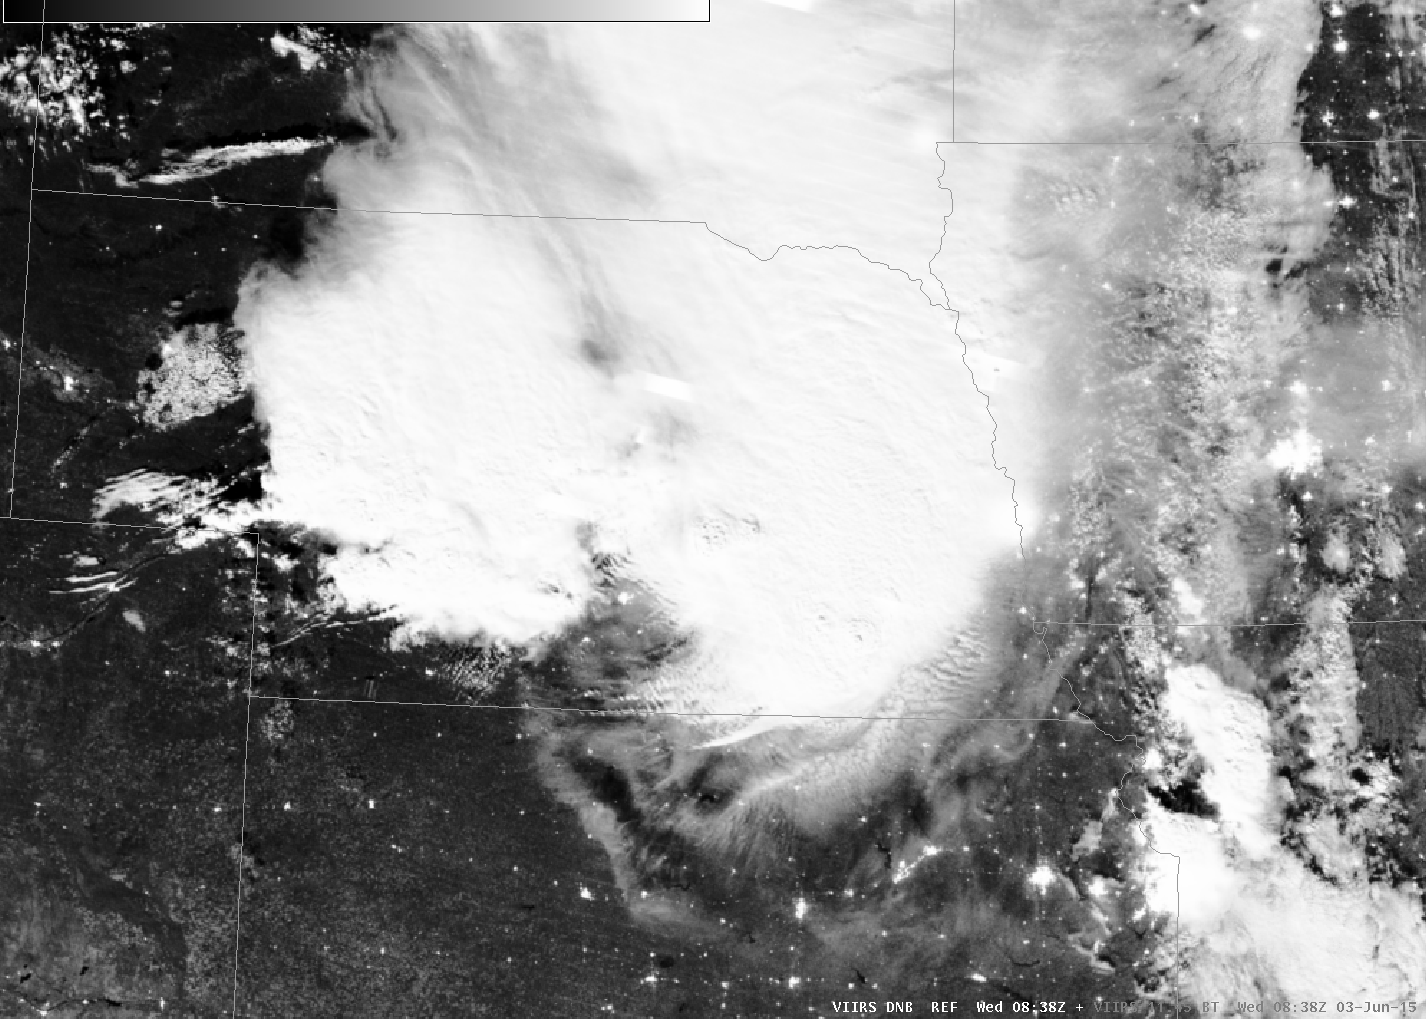 Suomi NPP VIIRS 0.70 µm visible Day Night Band and 11.45 µm infrared imagery at 0848 UTC on 3 June 2015 (click to enlarge)